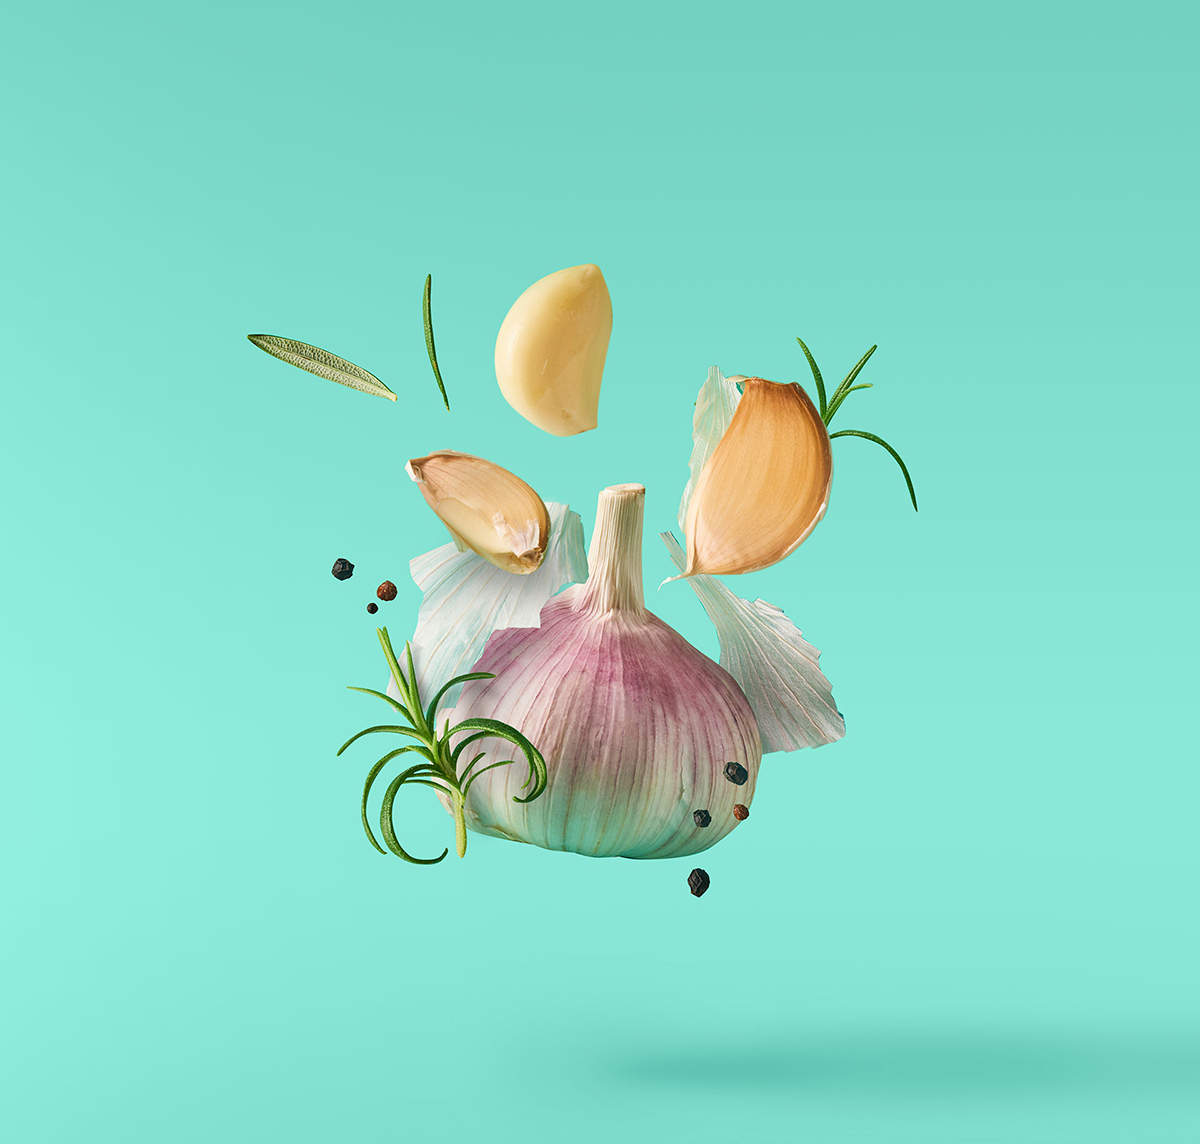 An image of fresh garlic and other herbs suspended in mid-air.